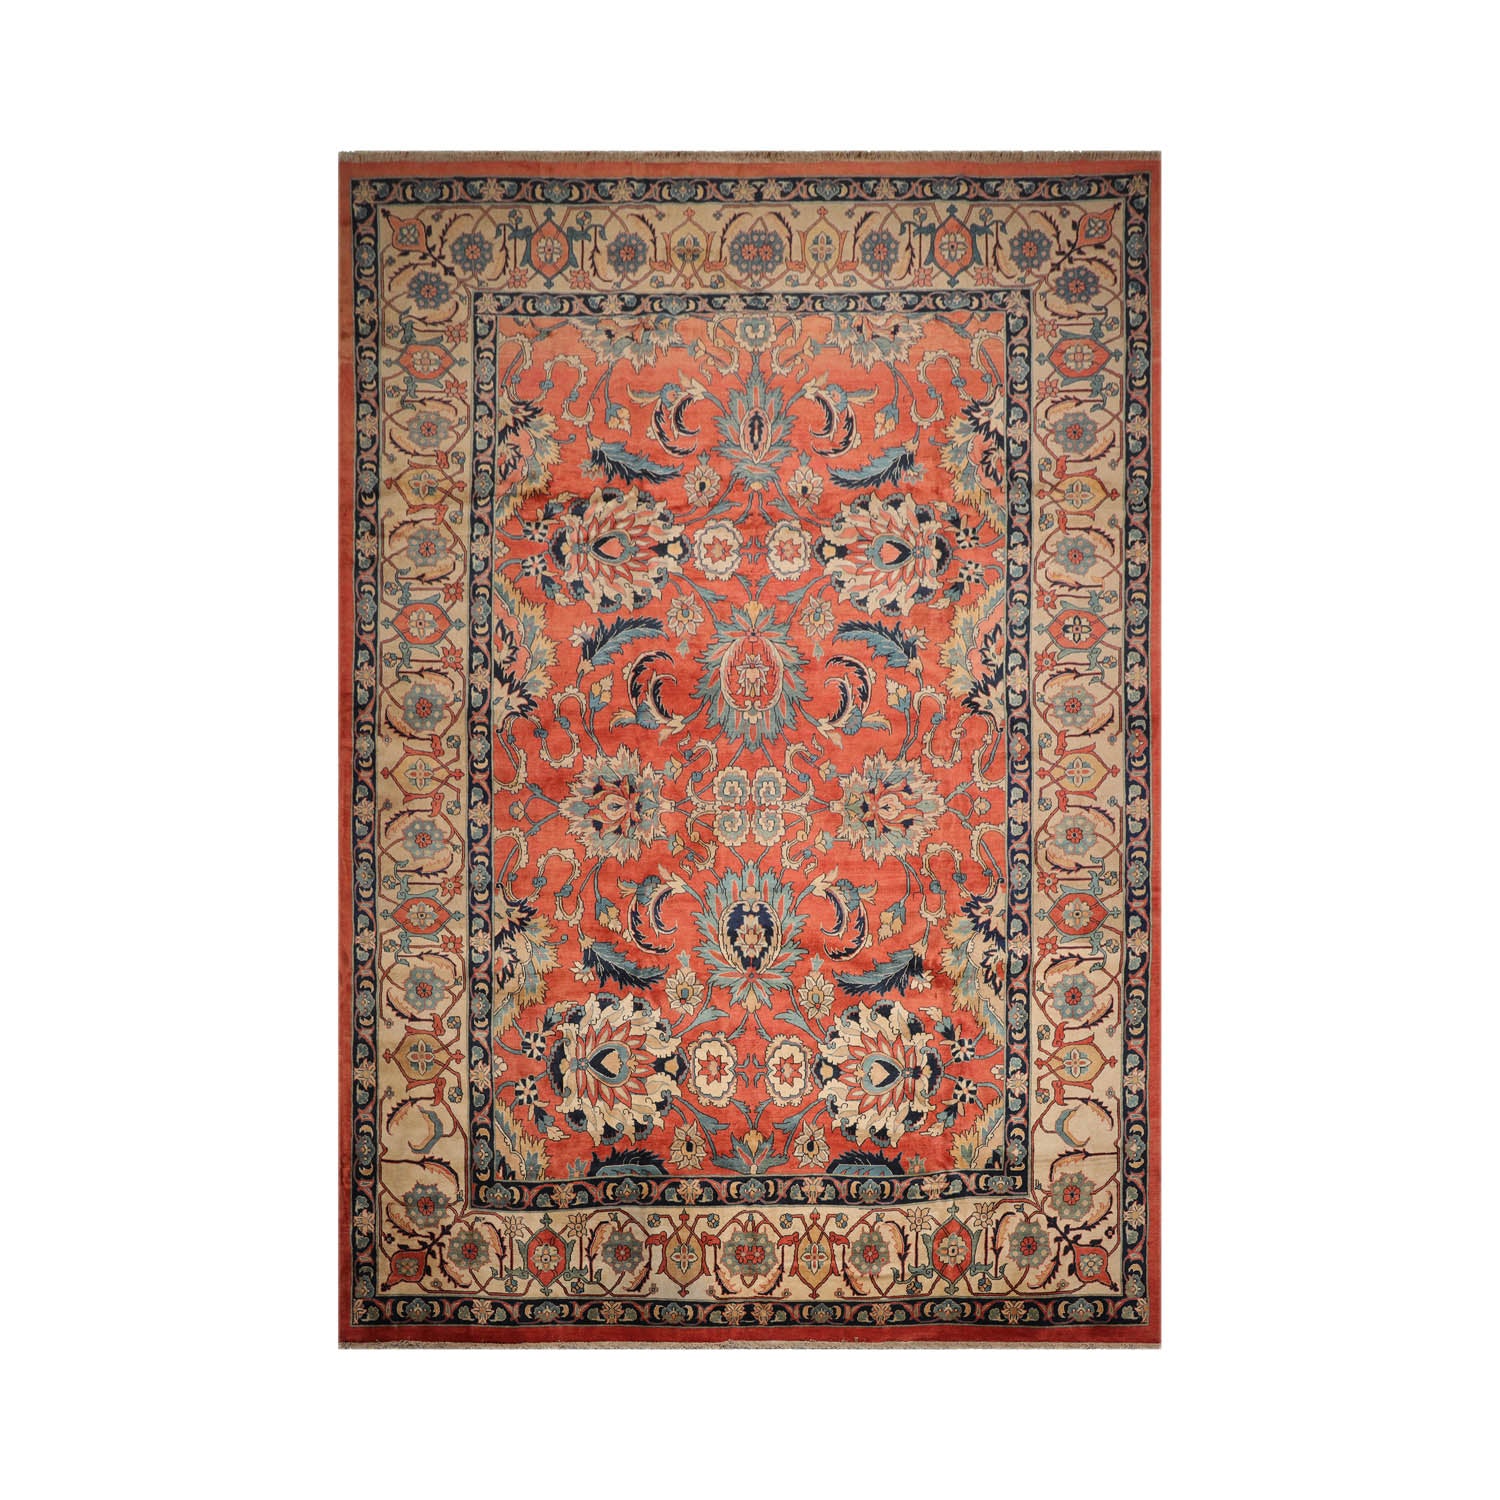 Diavione Palace Hand Knotted Persian 100% Wool Mahal Arts & Crafts Oriental Area Rug Salmon, Ivory Color